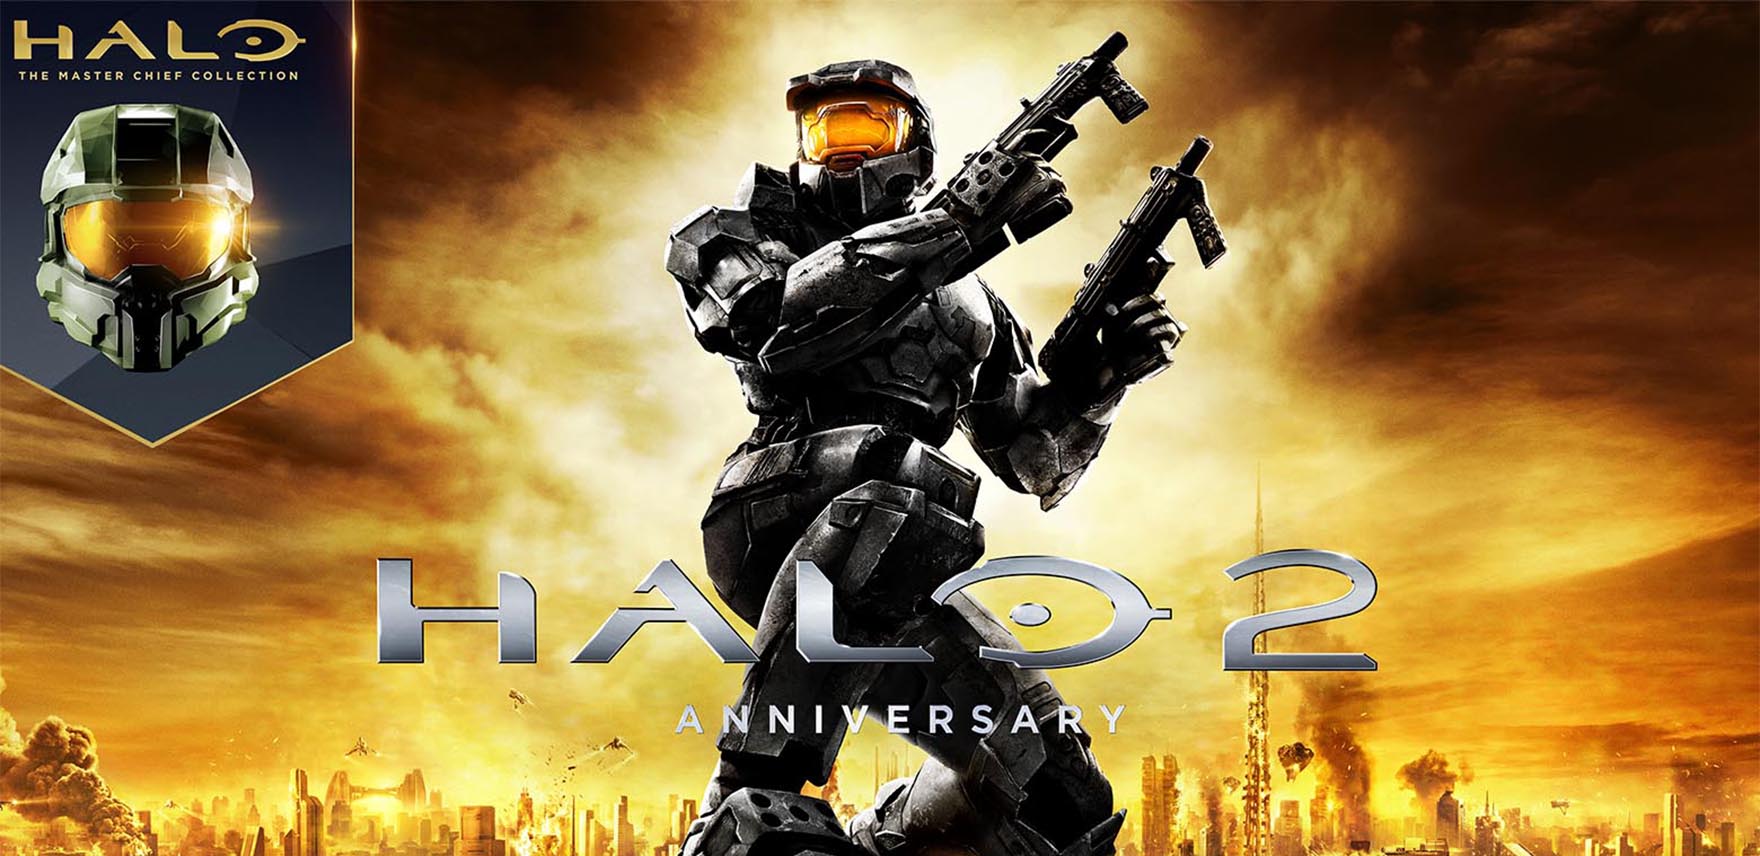 Halo: The Master Chief Collection title art